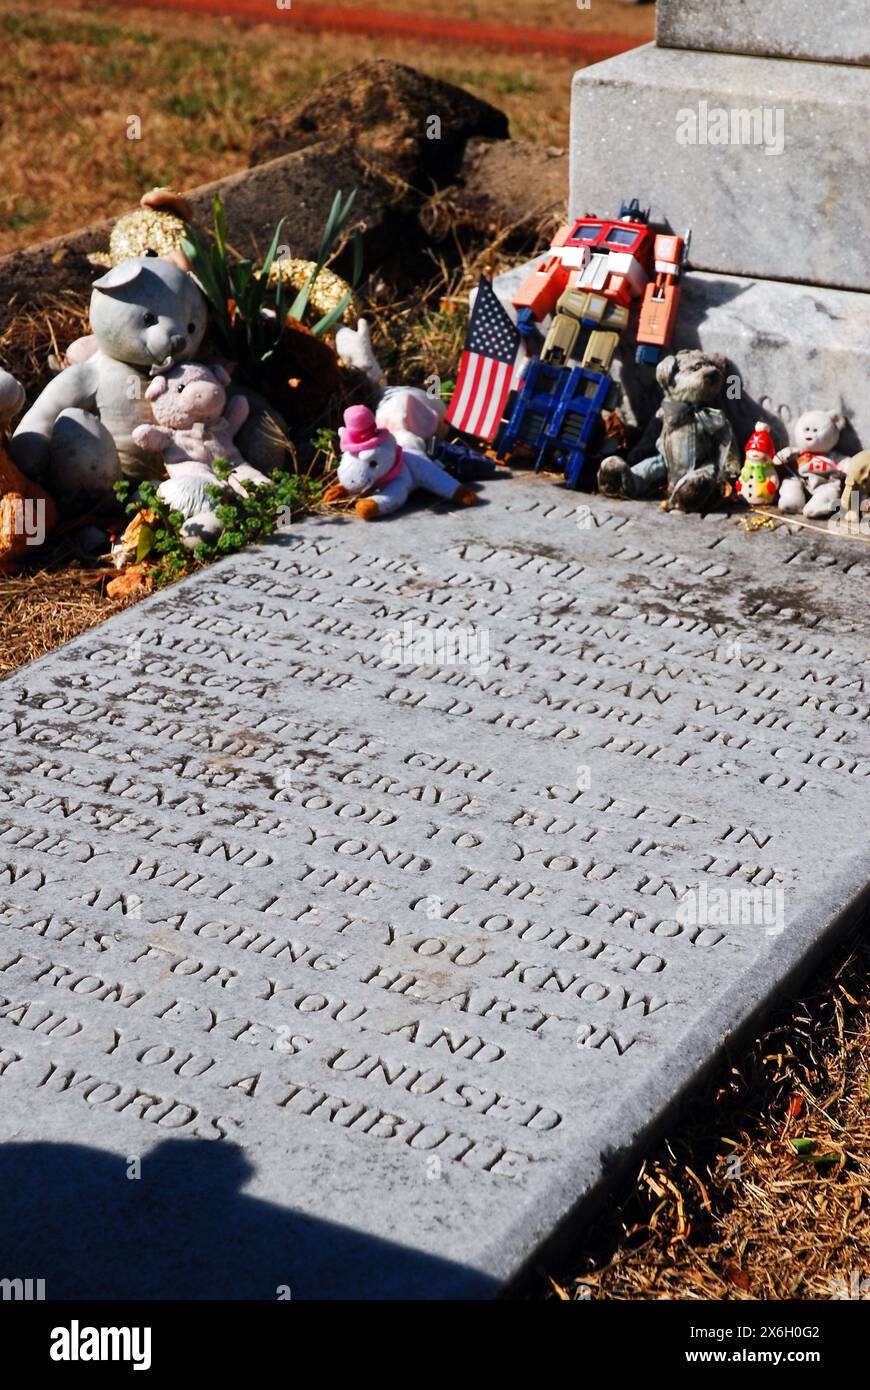 Well wishers and visitors leave gifts, toys and stuffed animals at the grave of Mary Phagan, a young girl murdered under mysterious circumstances Stock Photo